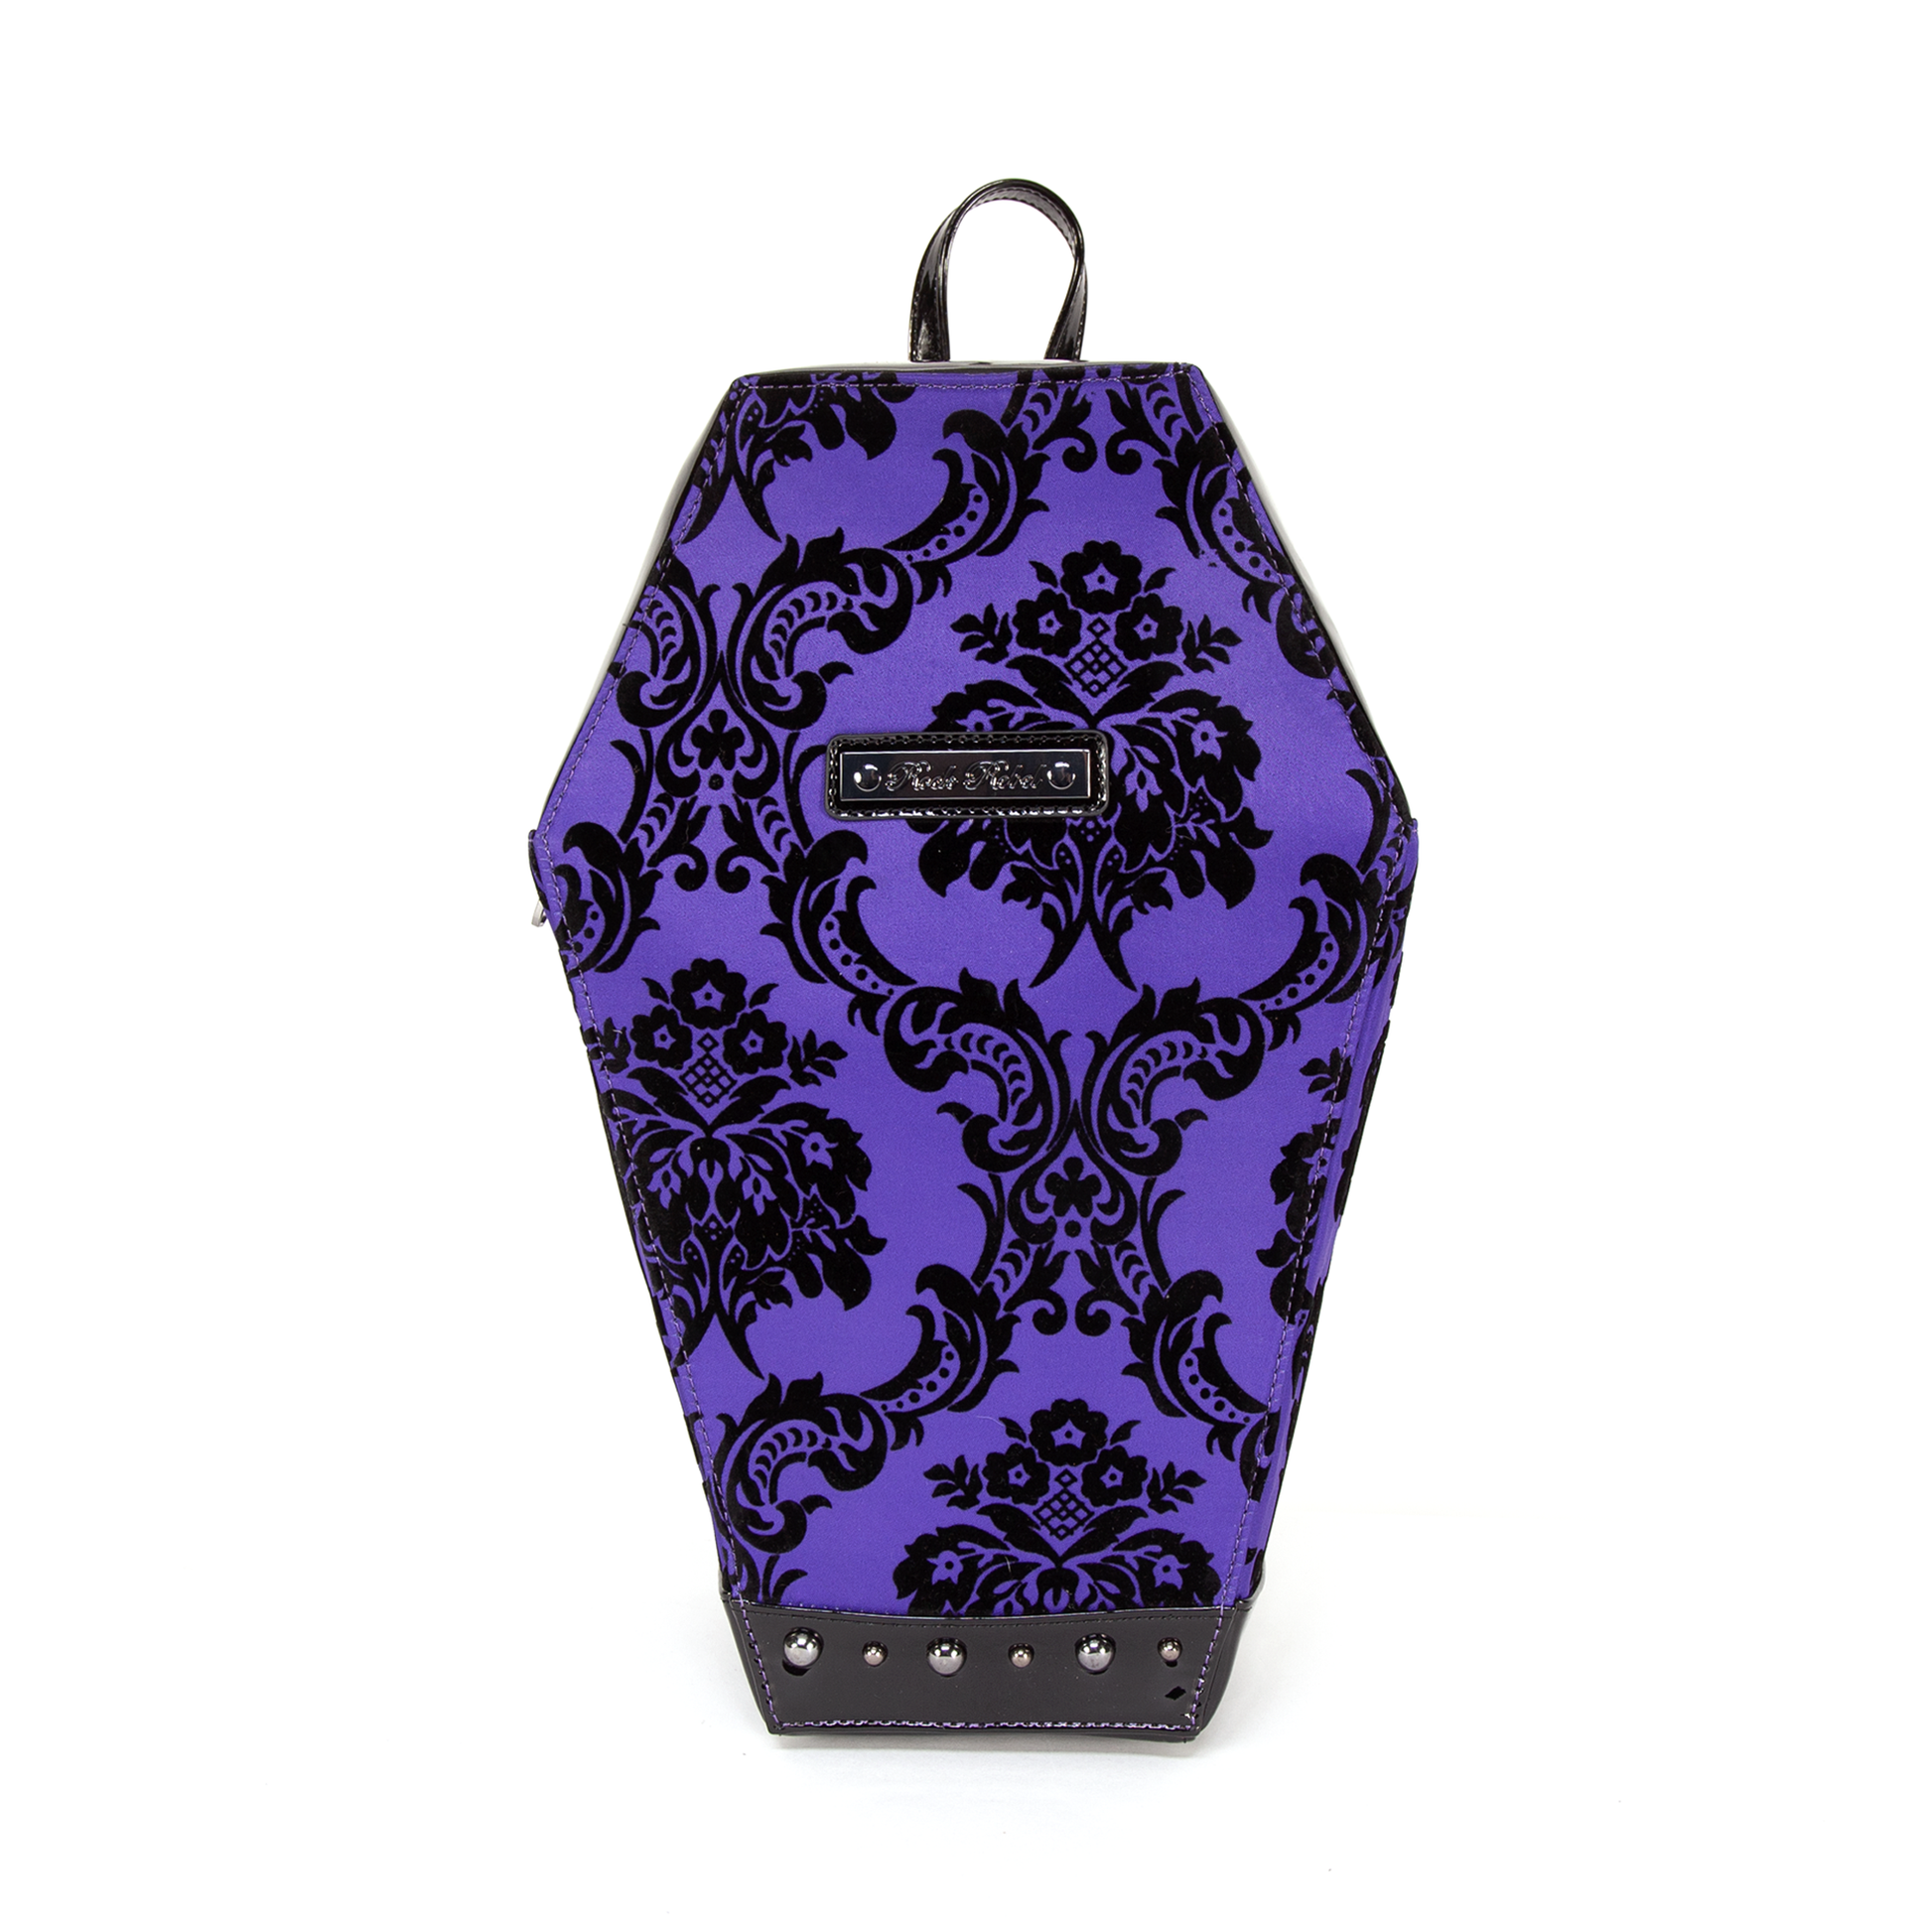 Gothic Coffin Shaped Backpack. punk rock, alternative & horror inspired purse